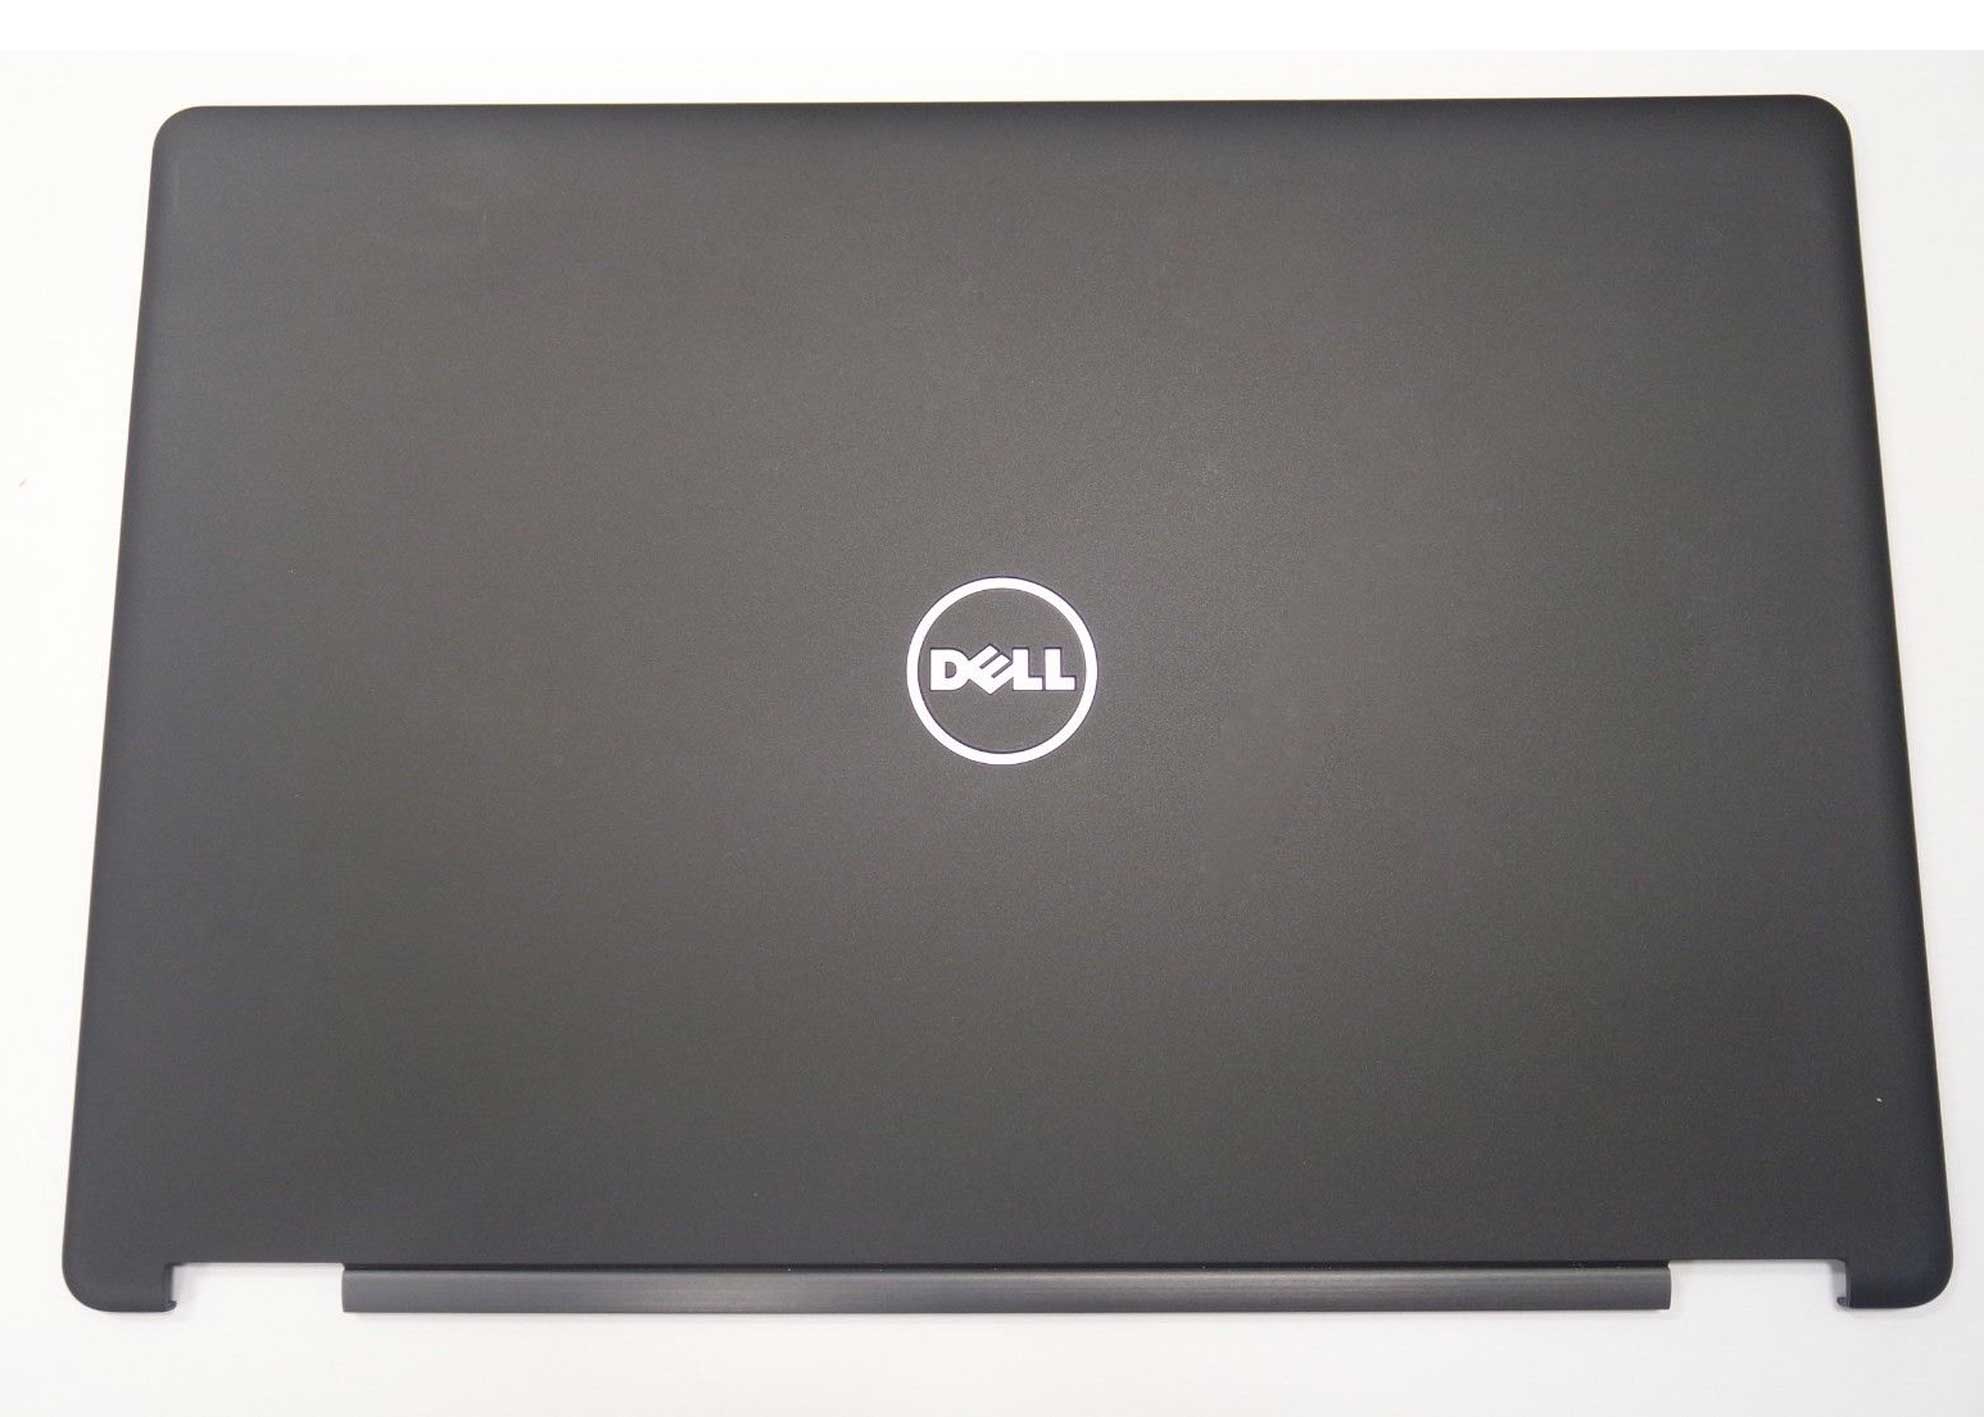 NEW Dell Vostro V131 RED LCD Back Cover Lid rear bezel No Hinges 2PPM4 02PPM4